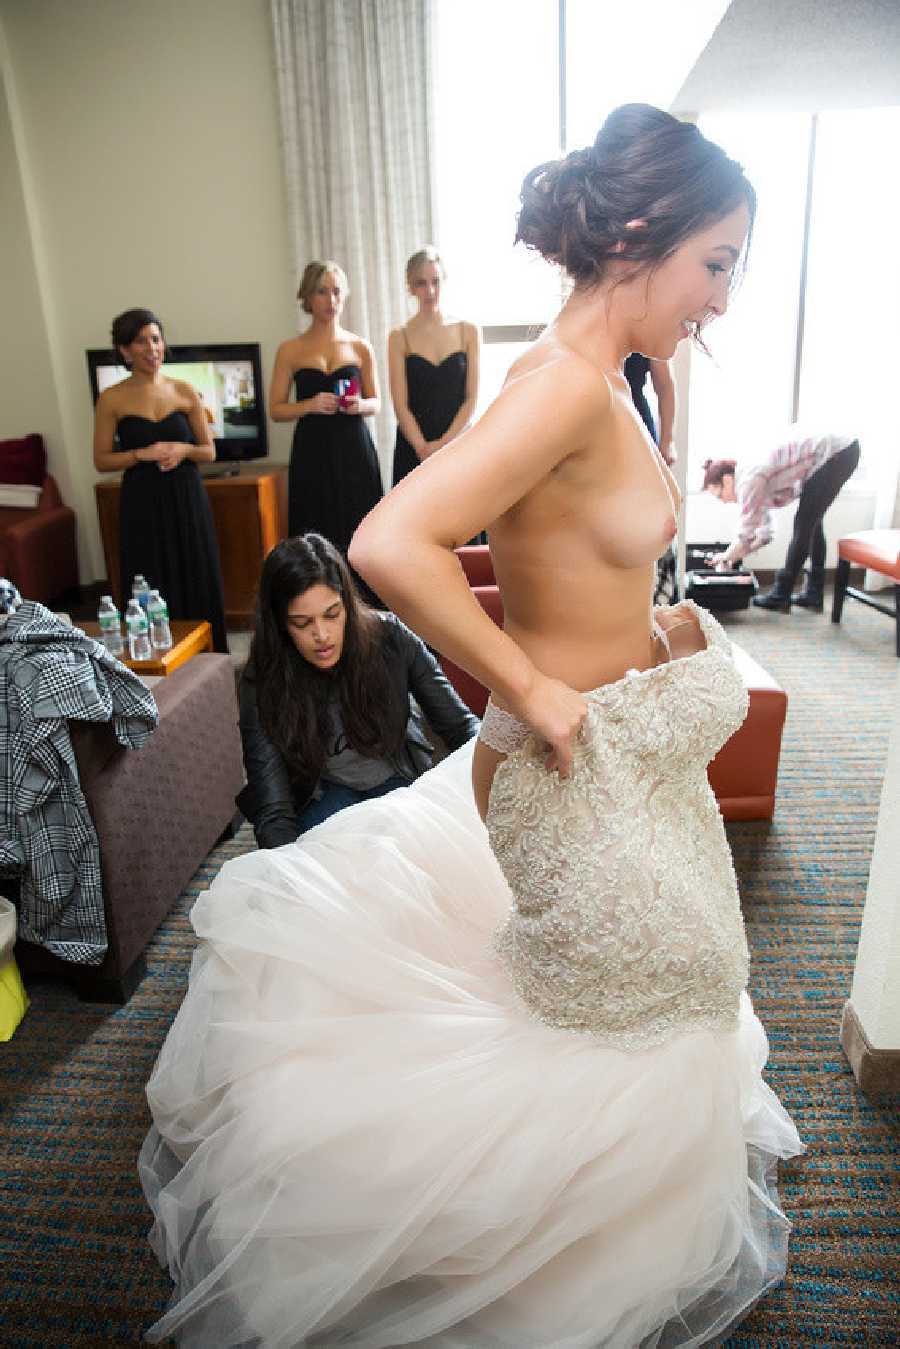 amateur nude wedding pictures